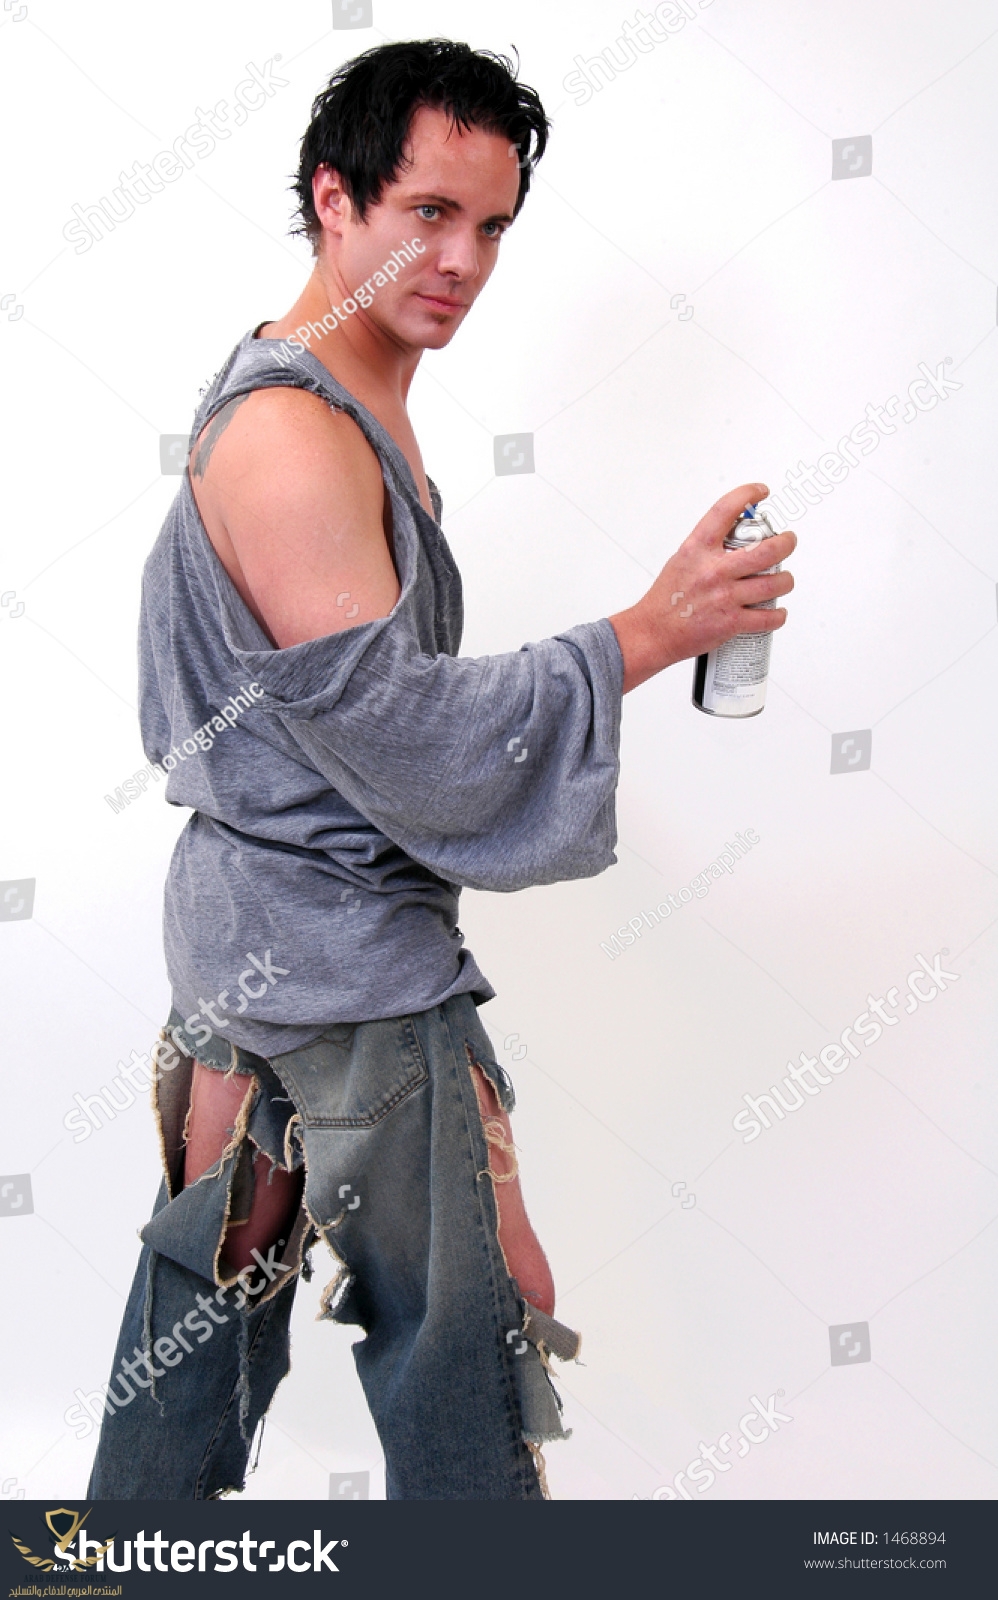 stock-photo-a-vandal-in-torn-clothing-about-to-spray-paint-a-wall-1468894.jpg